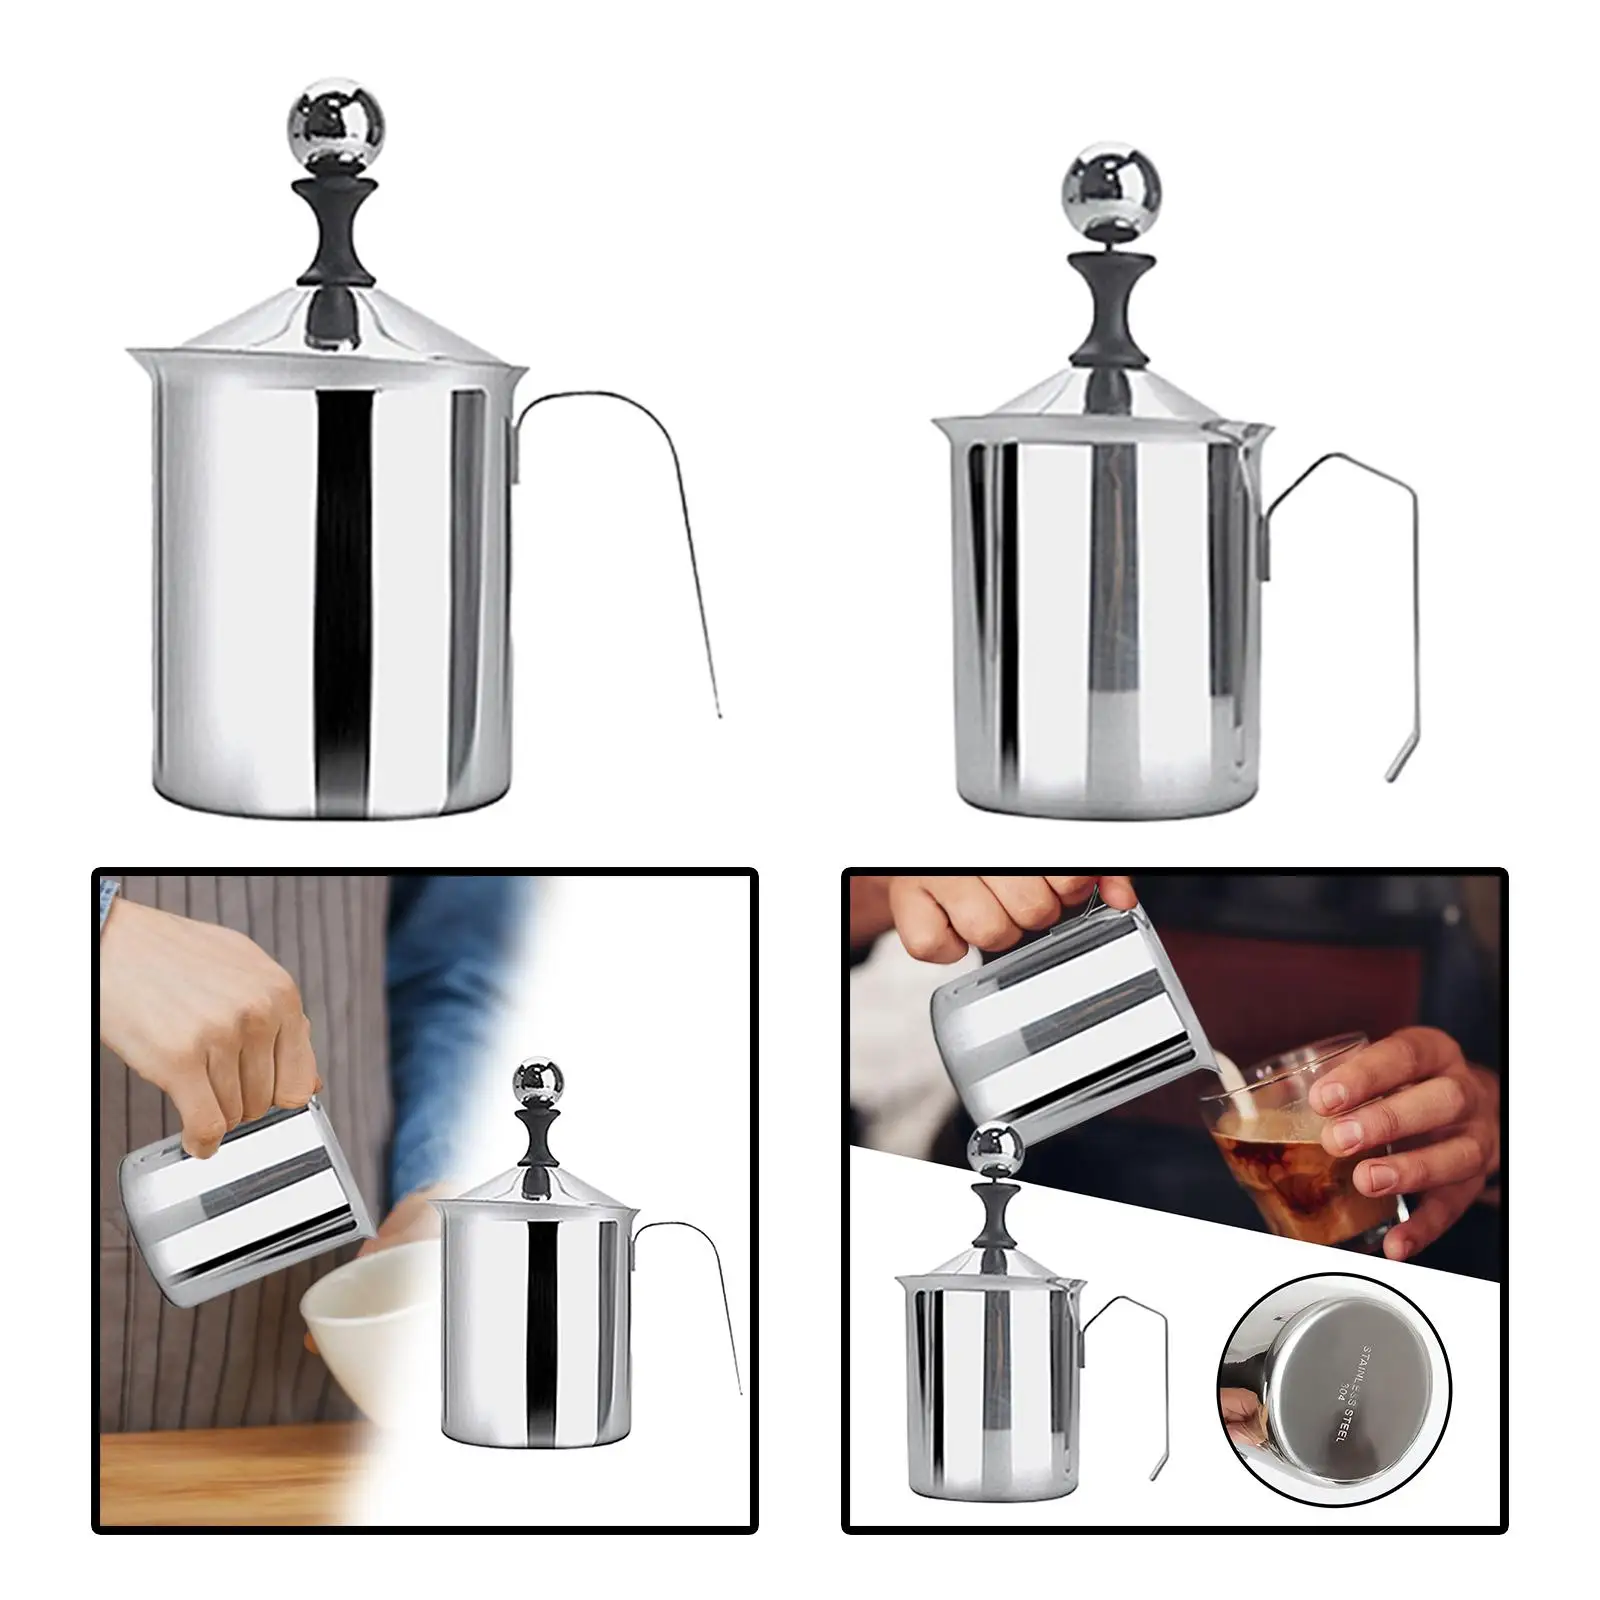 Stainless Steel Manual Milk Frother Coffee Creamer Comfortable Grip Handle Hand Pump Versatile Premium Material Durable with Lid